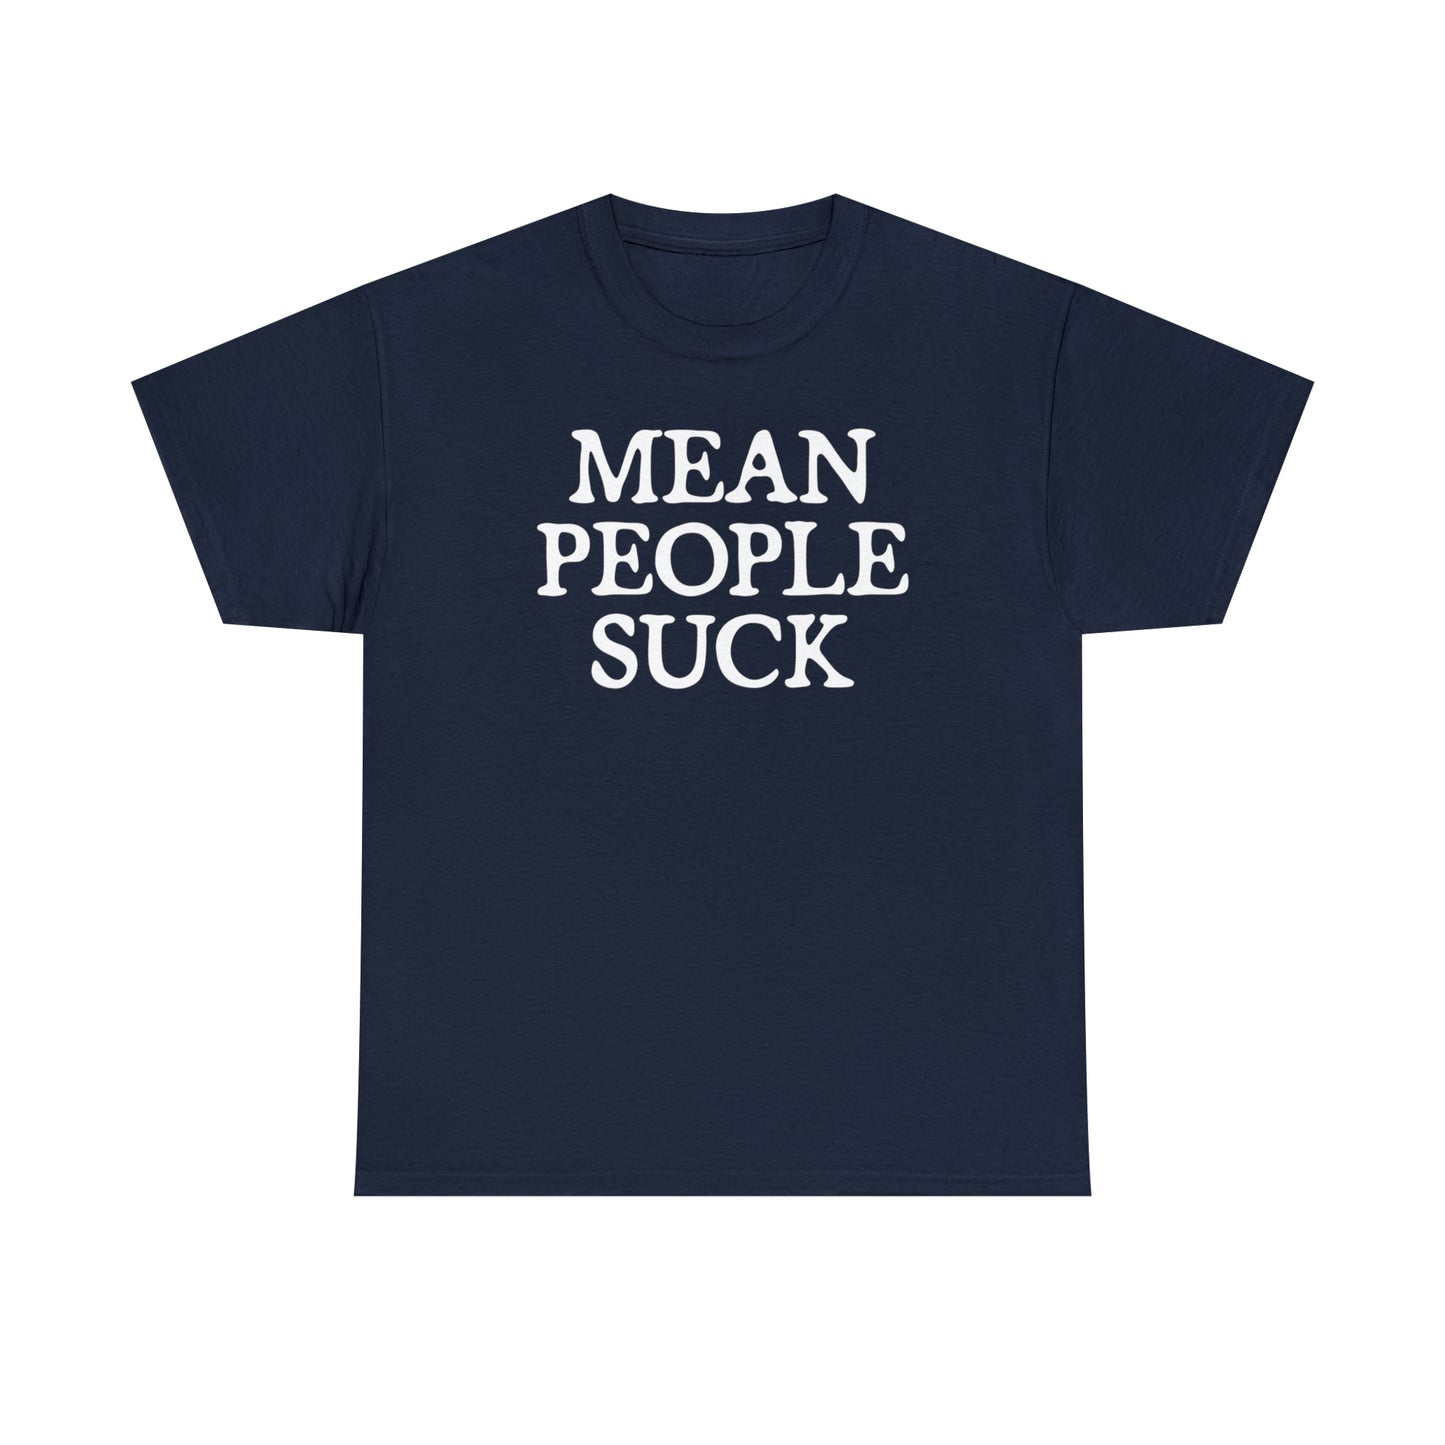 Mean People Suck T- Shirt For Sarcastic TShirt For Funny Saying T Shirt For PSA T Shirt For Birthday Gift